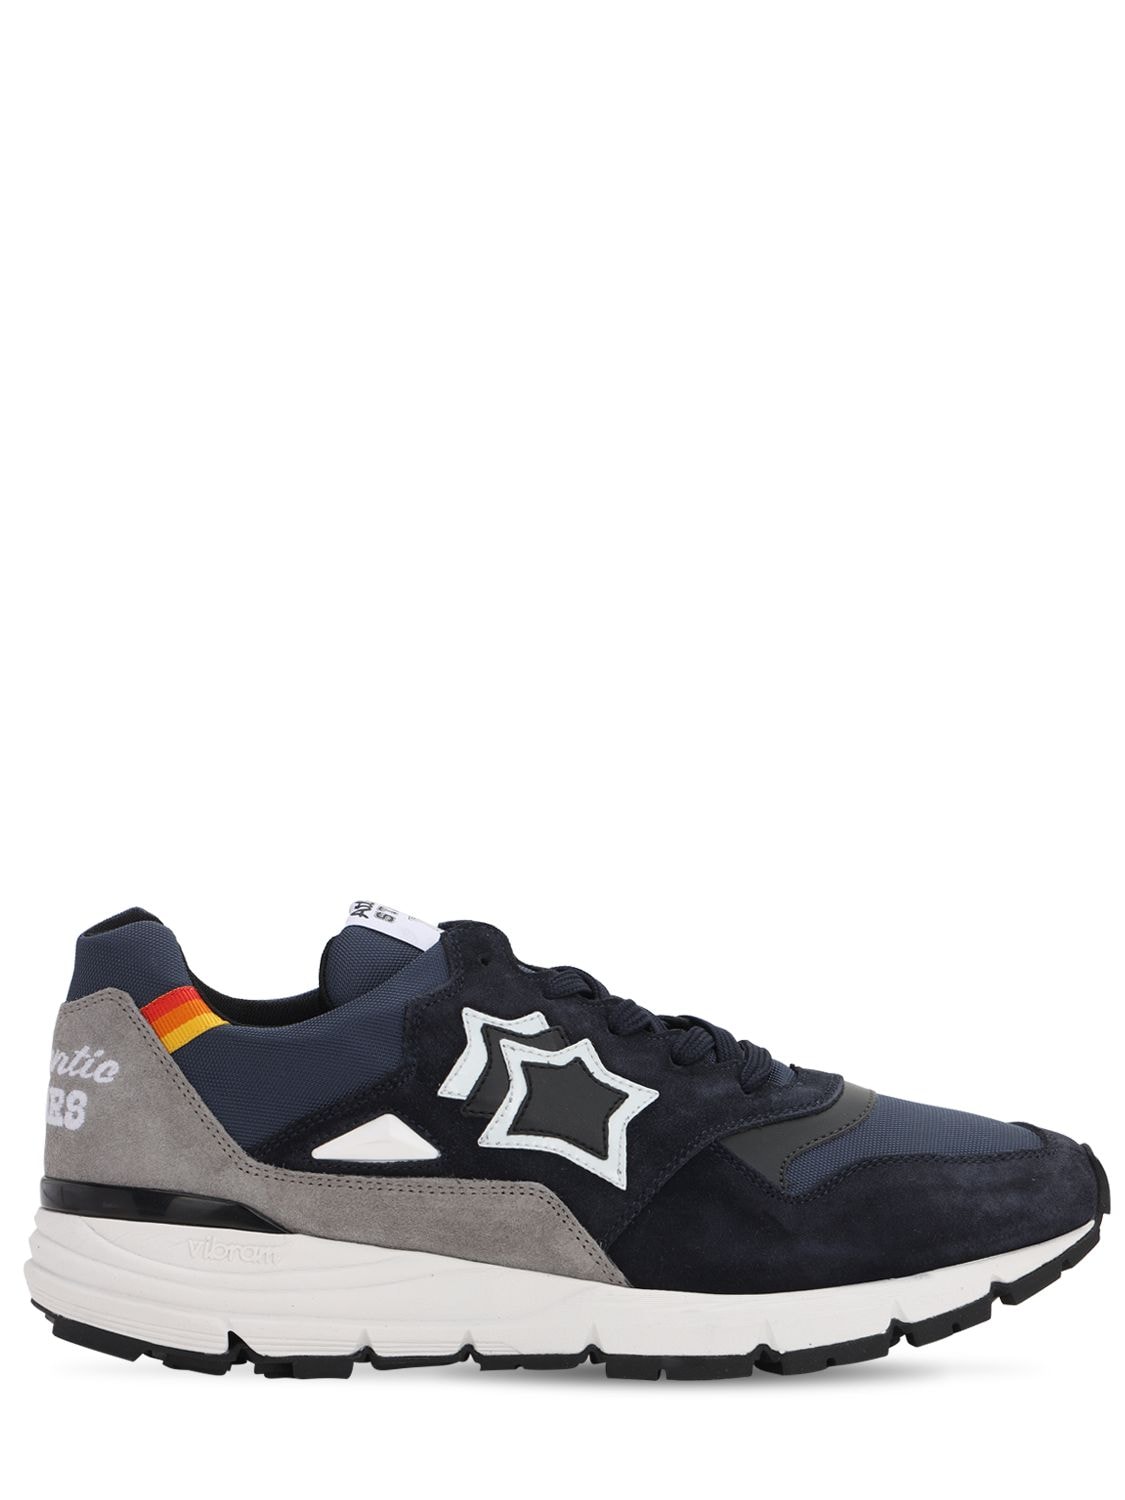 Atlantic Stars Polaris Sneakers In Suede And Nylon Color Blue In Navy ...